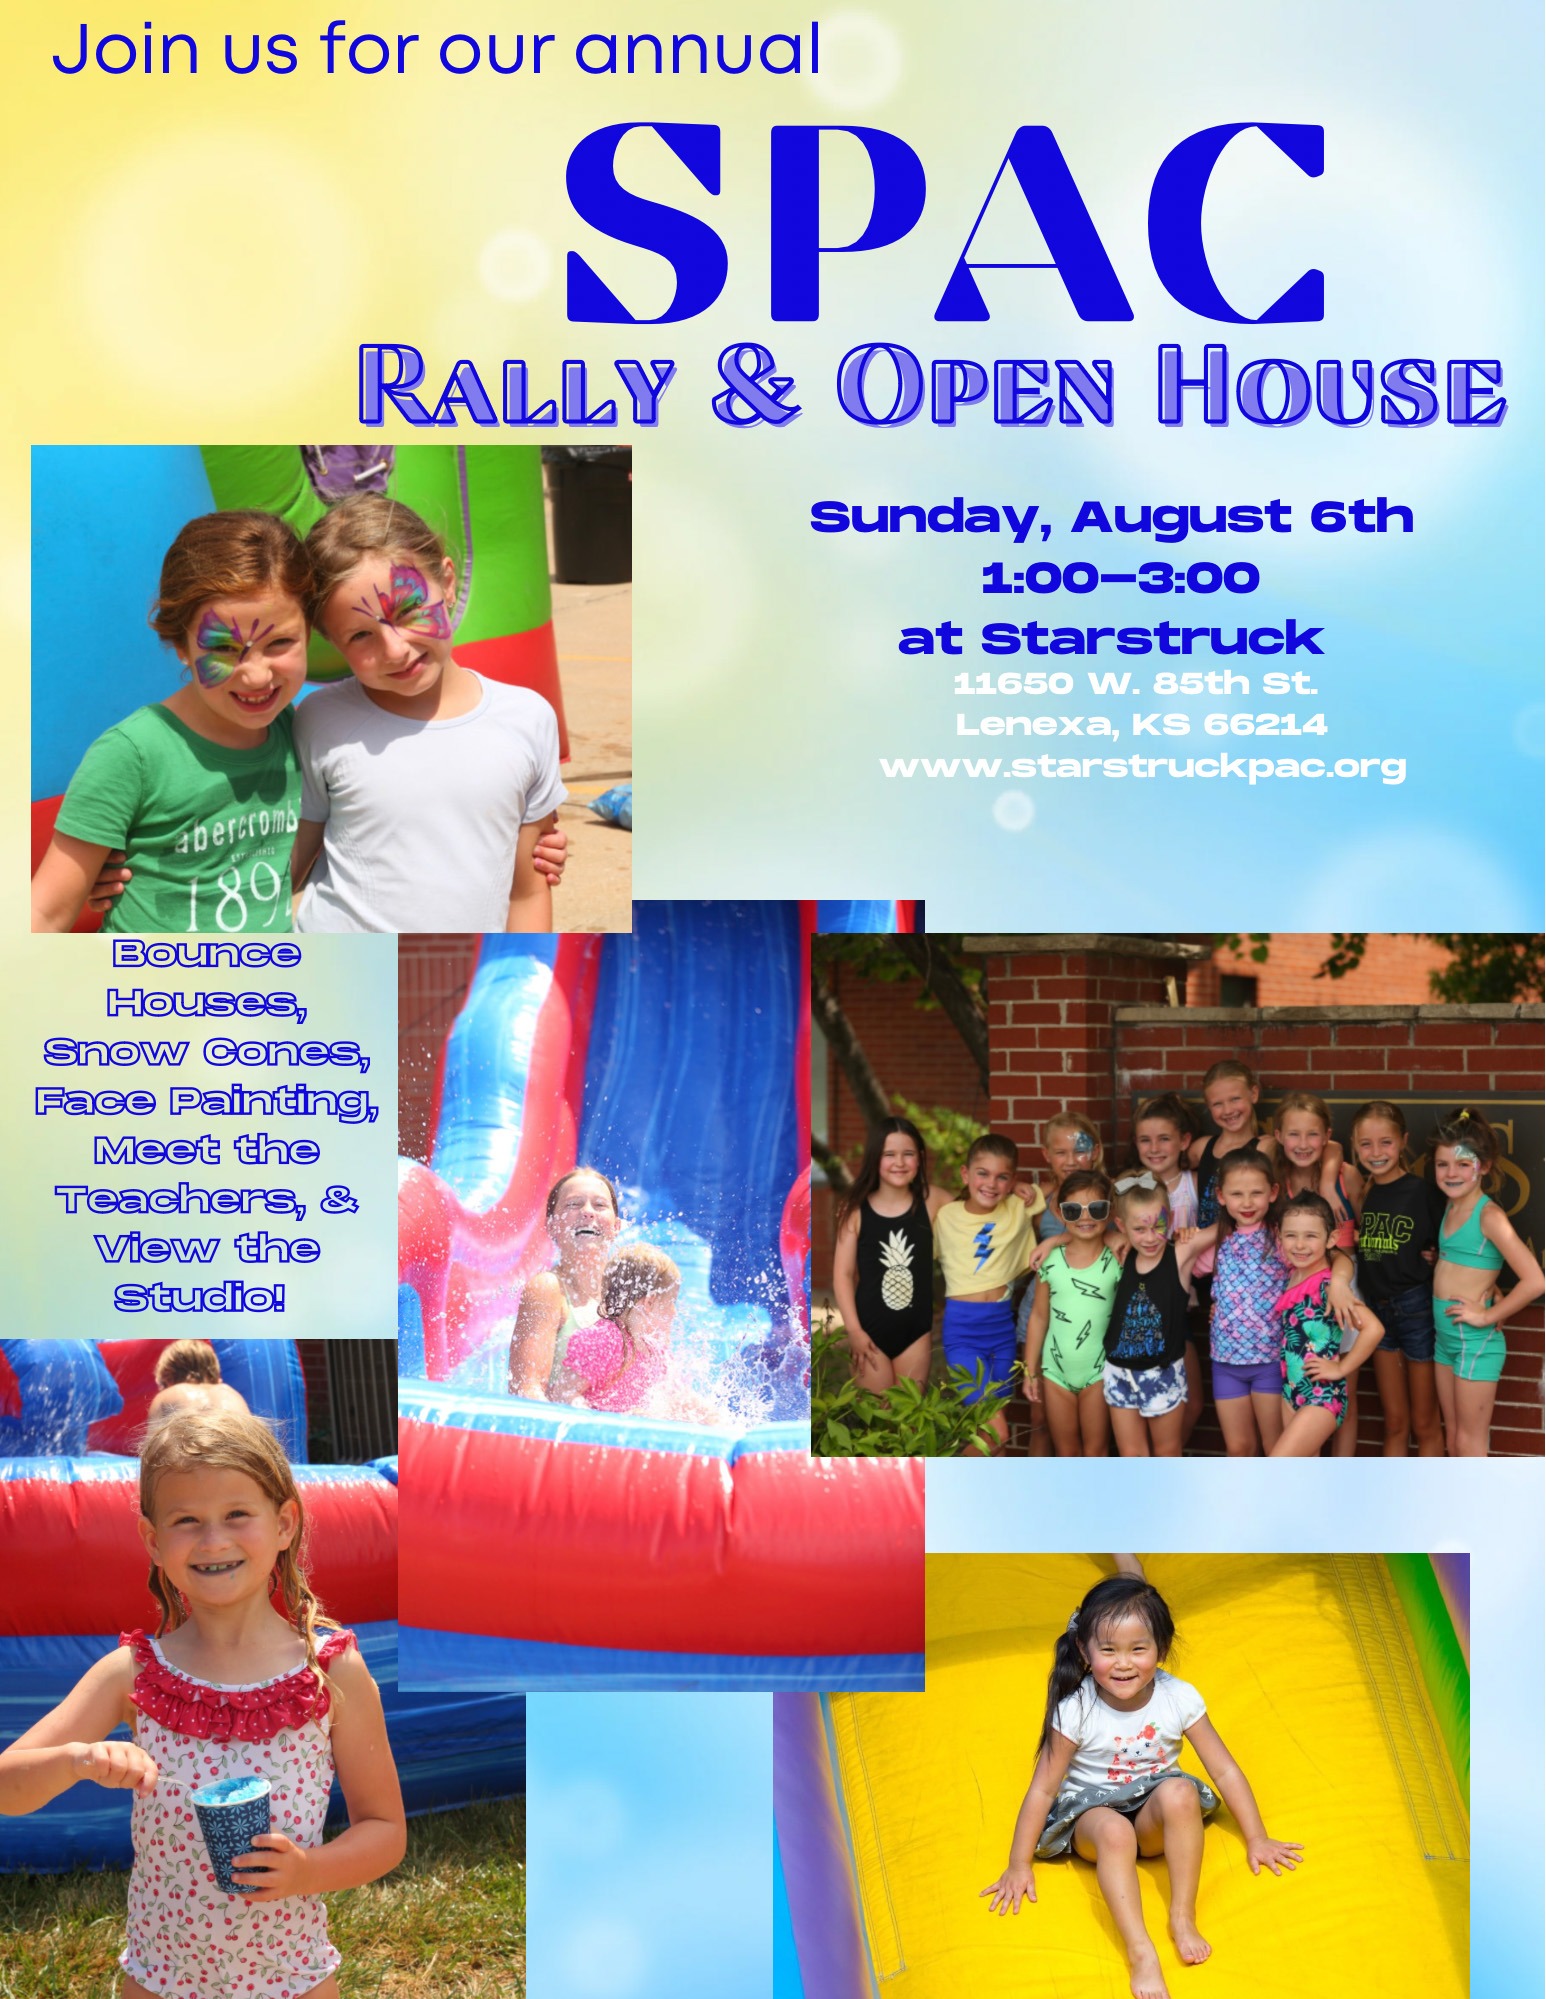 Starstruck Performing Arts Academy group Rally & Open House Info